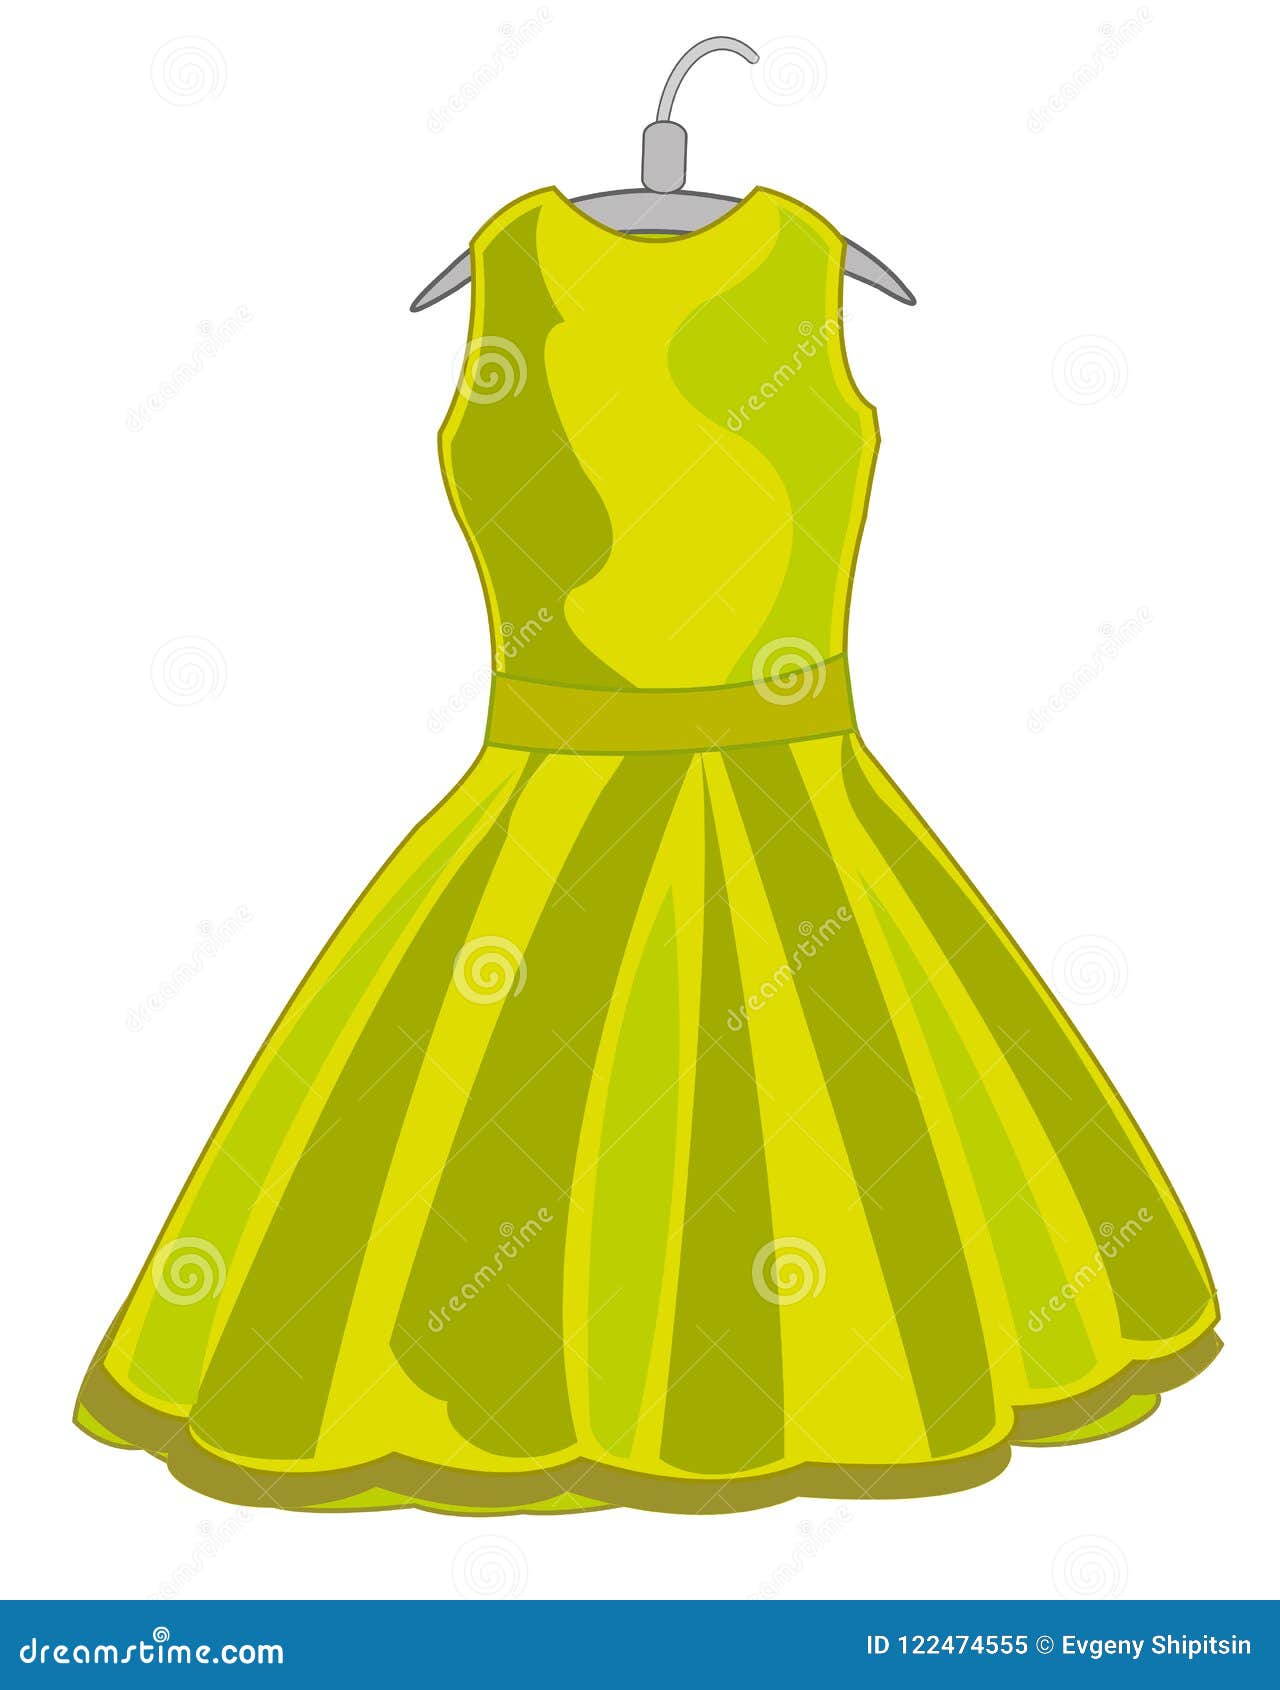 Feminine cloth gown stock vector. Illustration of gown - 122474555